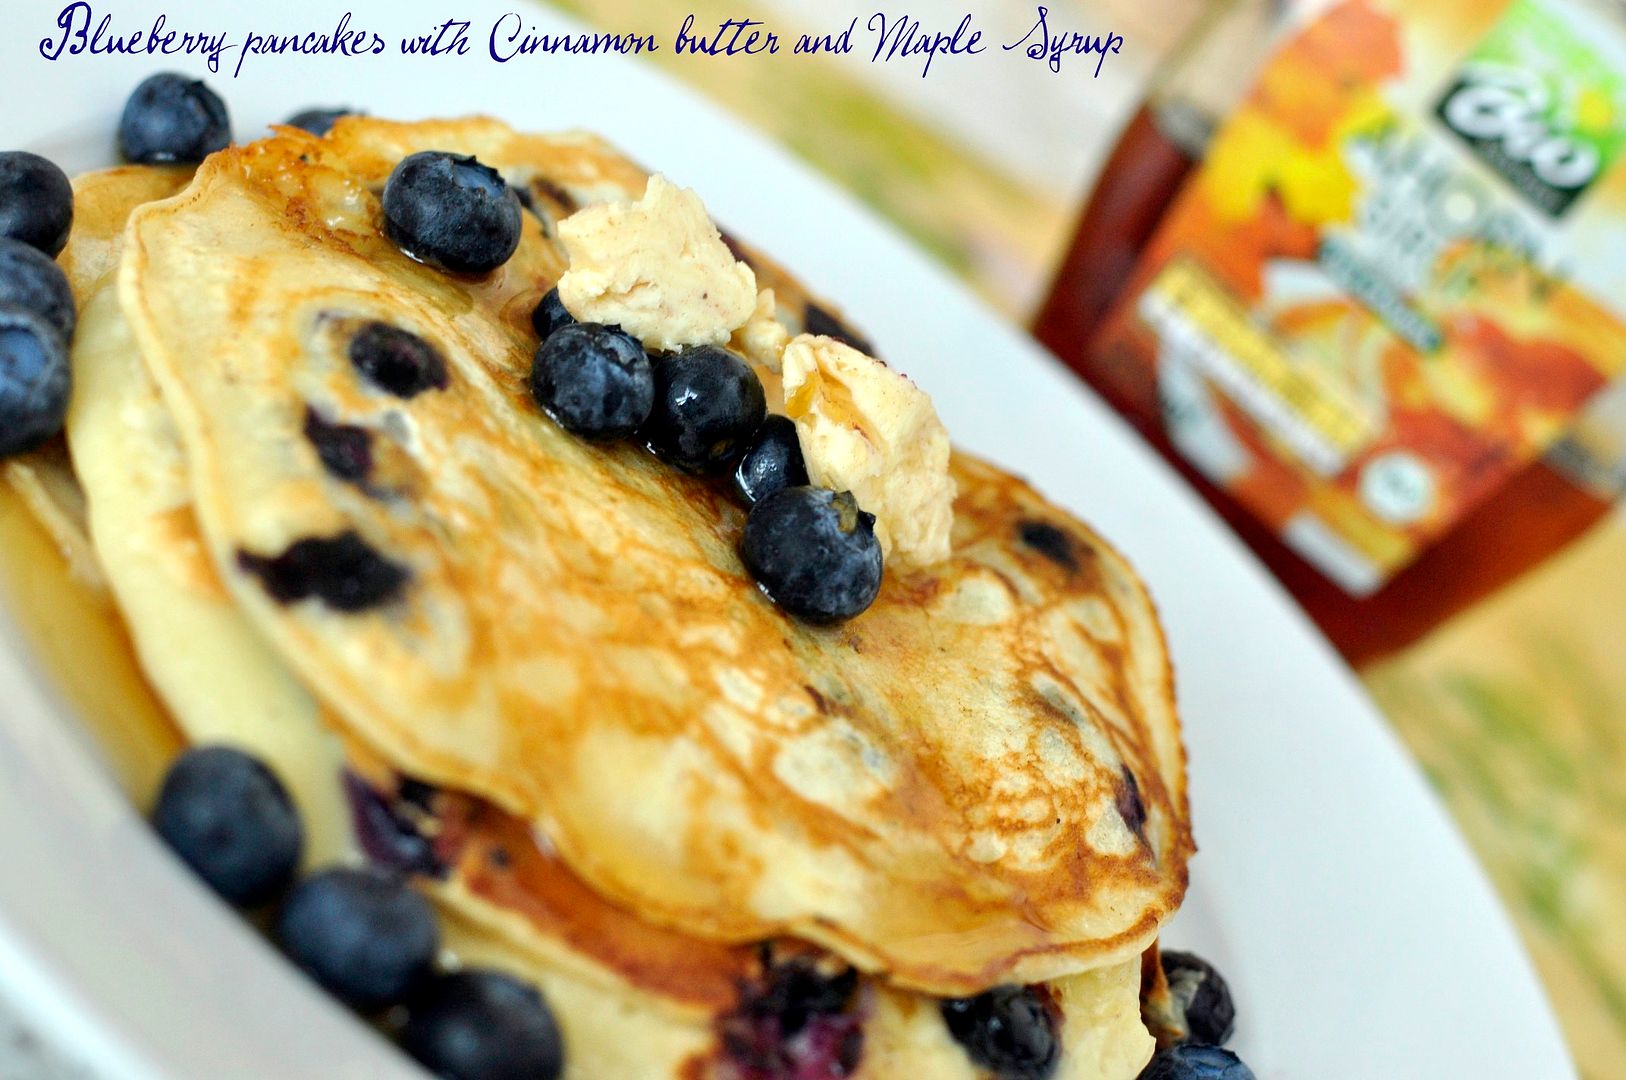 06.02.12, Over the weekend we had yummy blueberry pancakes for breakfast!!